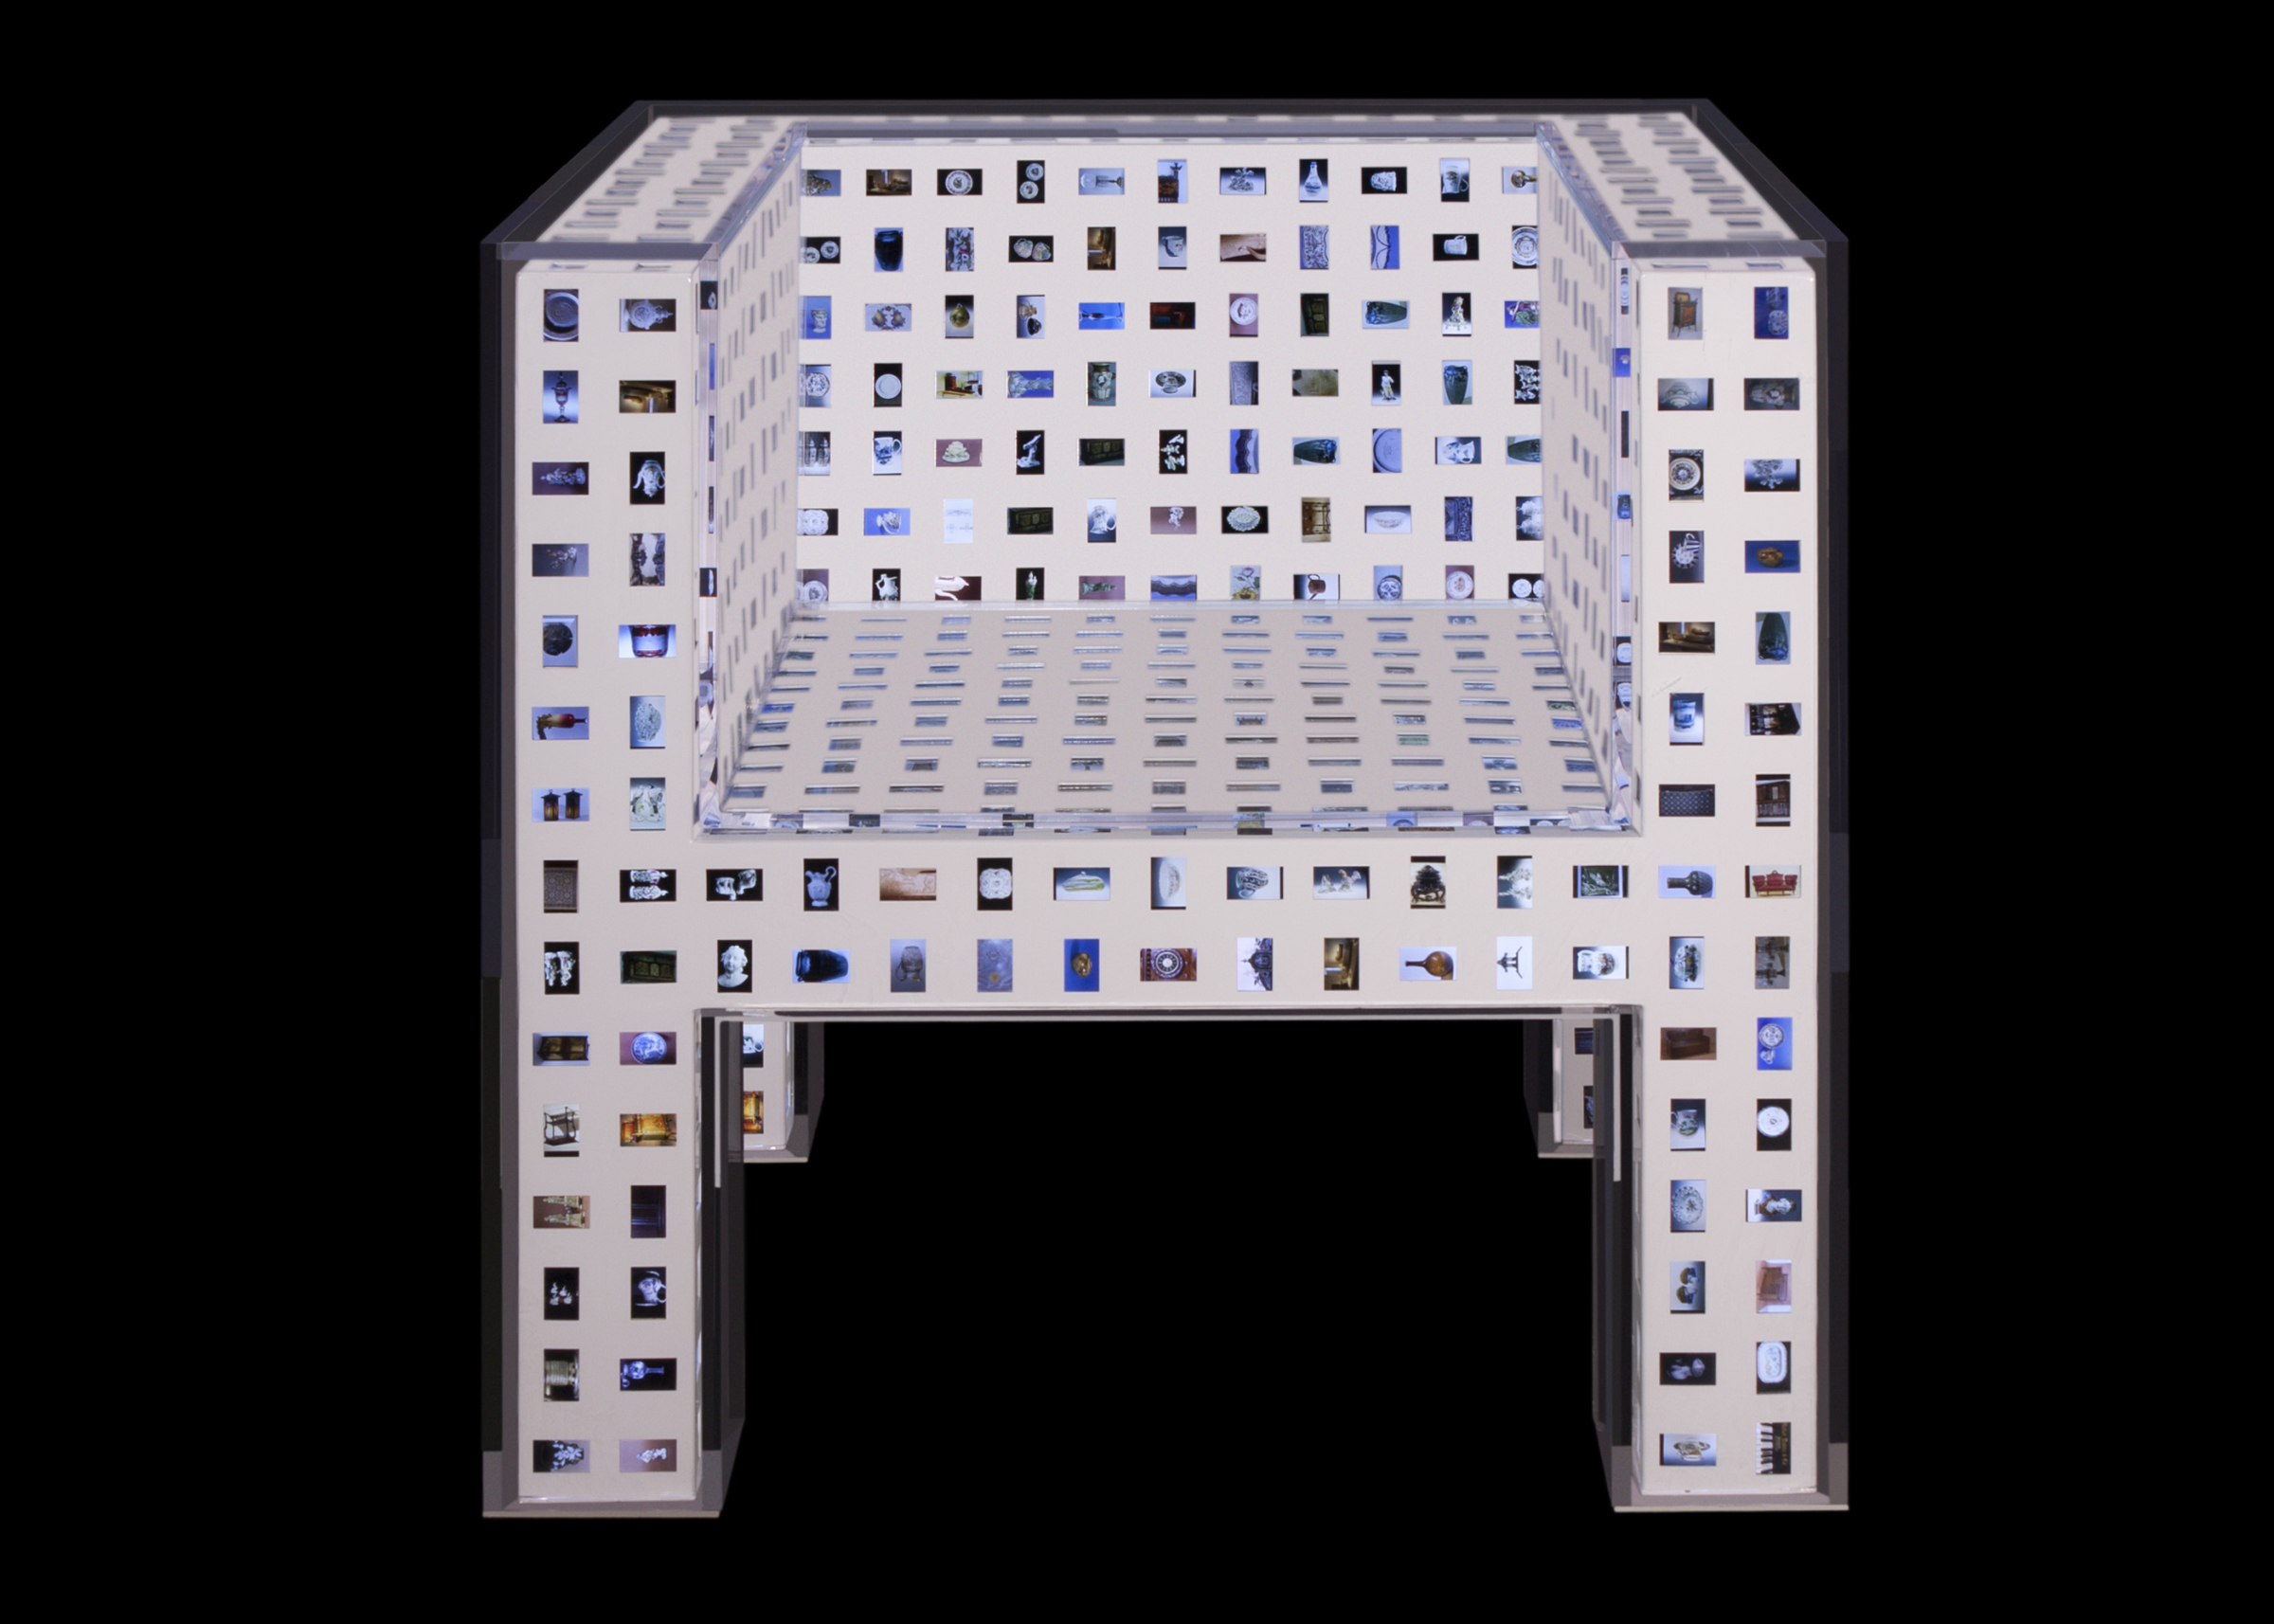 Benjamin Rollins Caldwell (American, born 1983), designer and maker, Lightbox Armchair, 2014-2015, acrylic with laser-cut white powder-coated steel frame, image slides and LED lights, High Museum of Art, Atlanta, purchased with foundation funds for the Acquisition of Decorative Arts, 2014.393.  © Benjamin Rollins Caldwell.